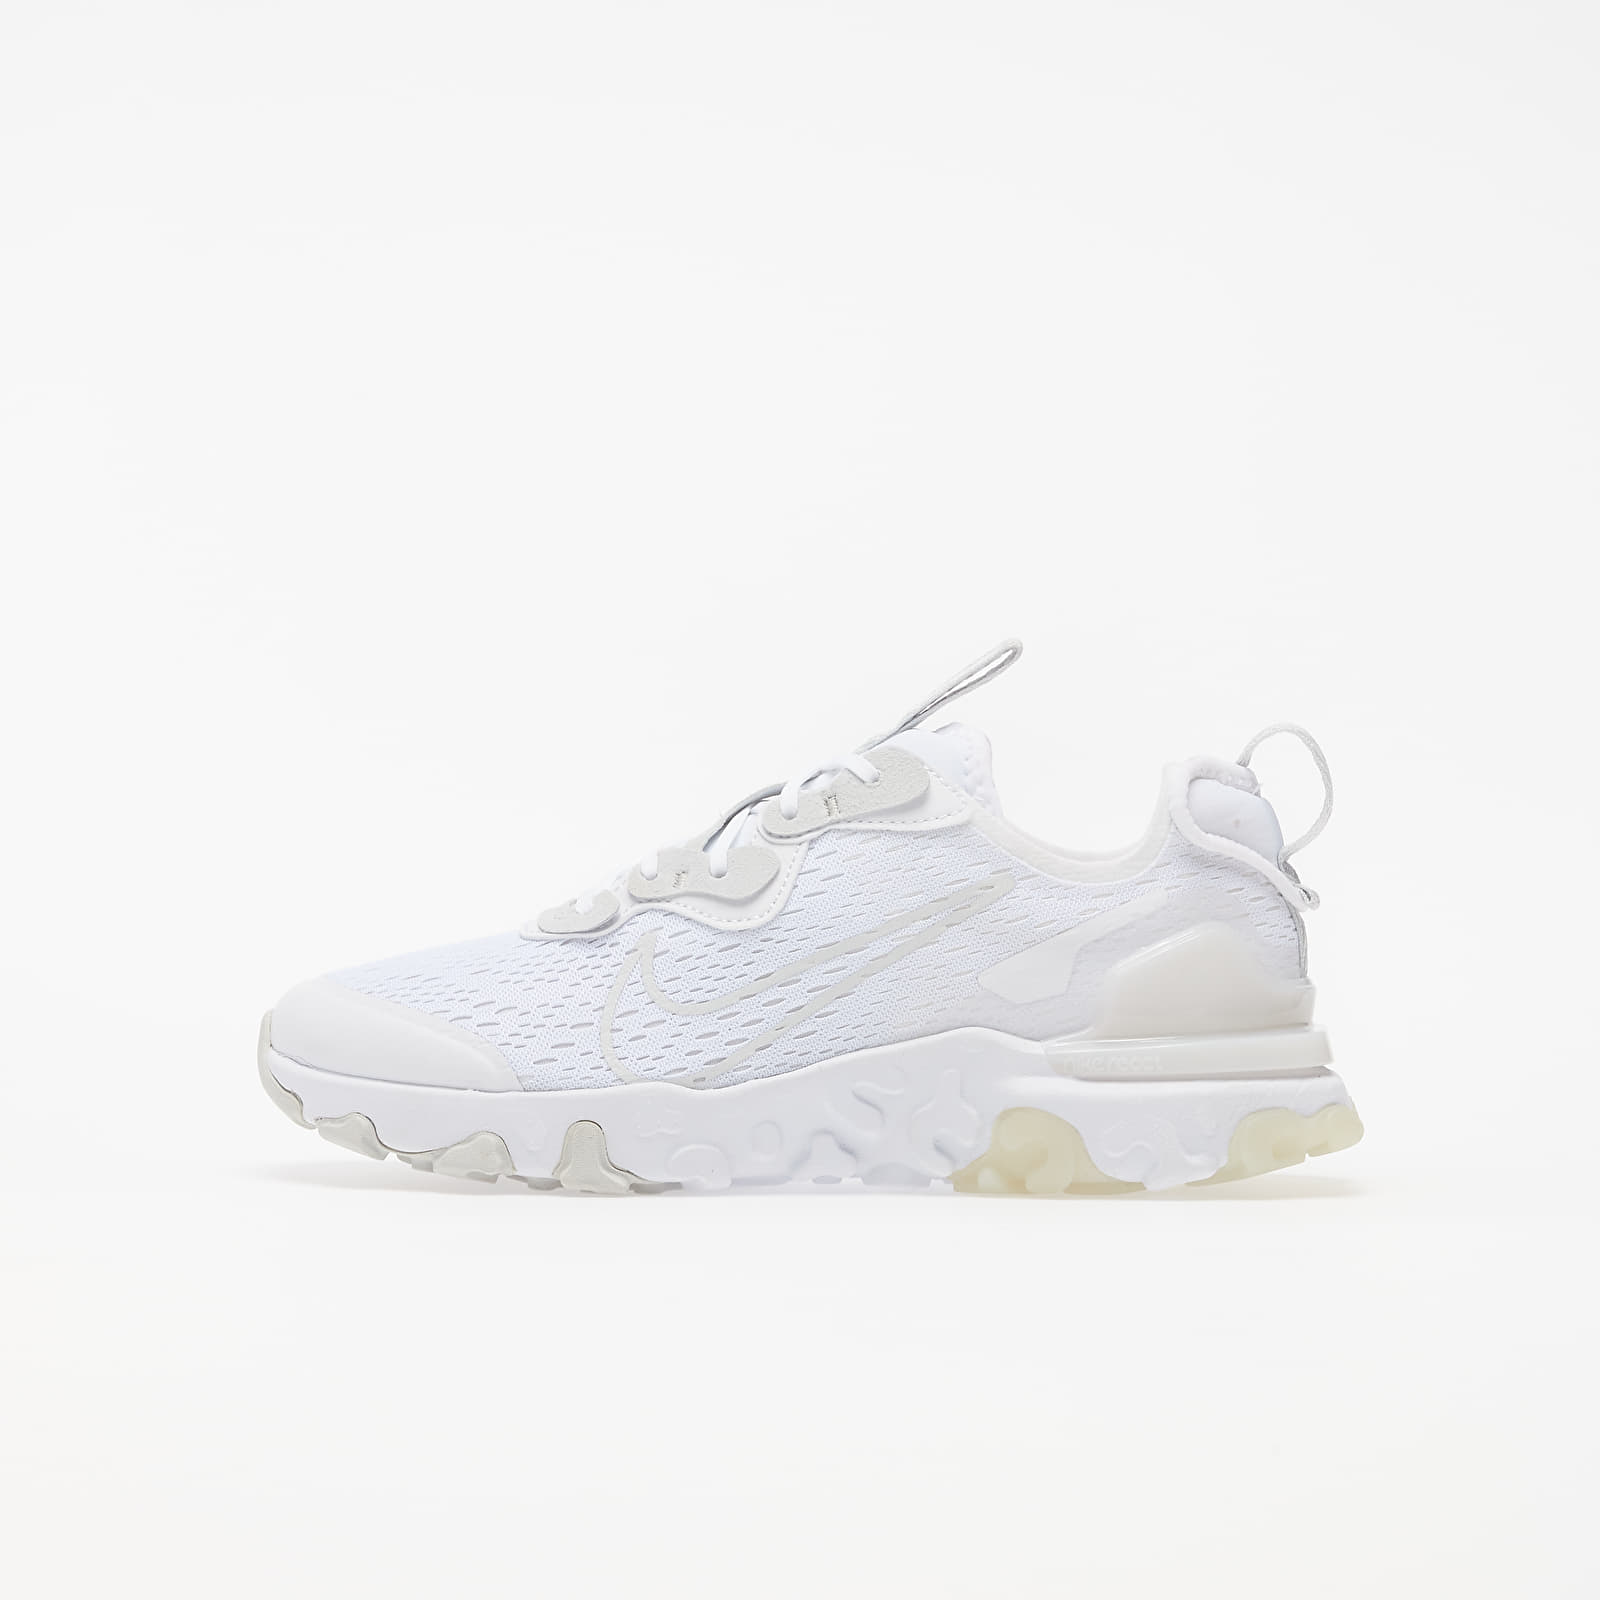 Kids' sneakers and shoes Nike React Vision White/ Photon Dust-White-Photon Dust